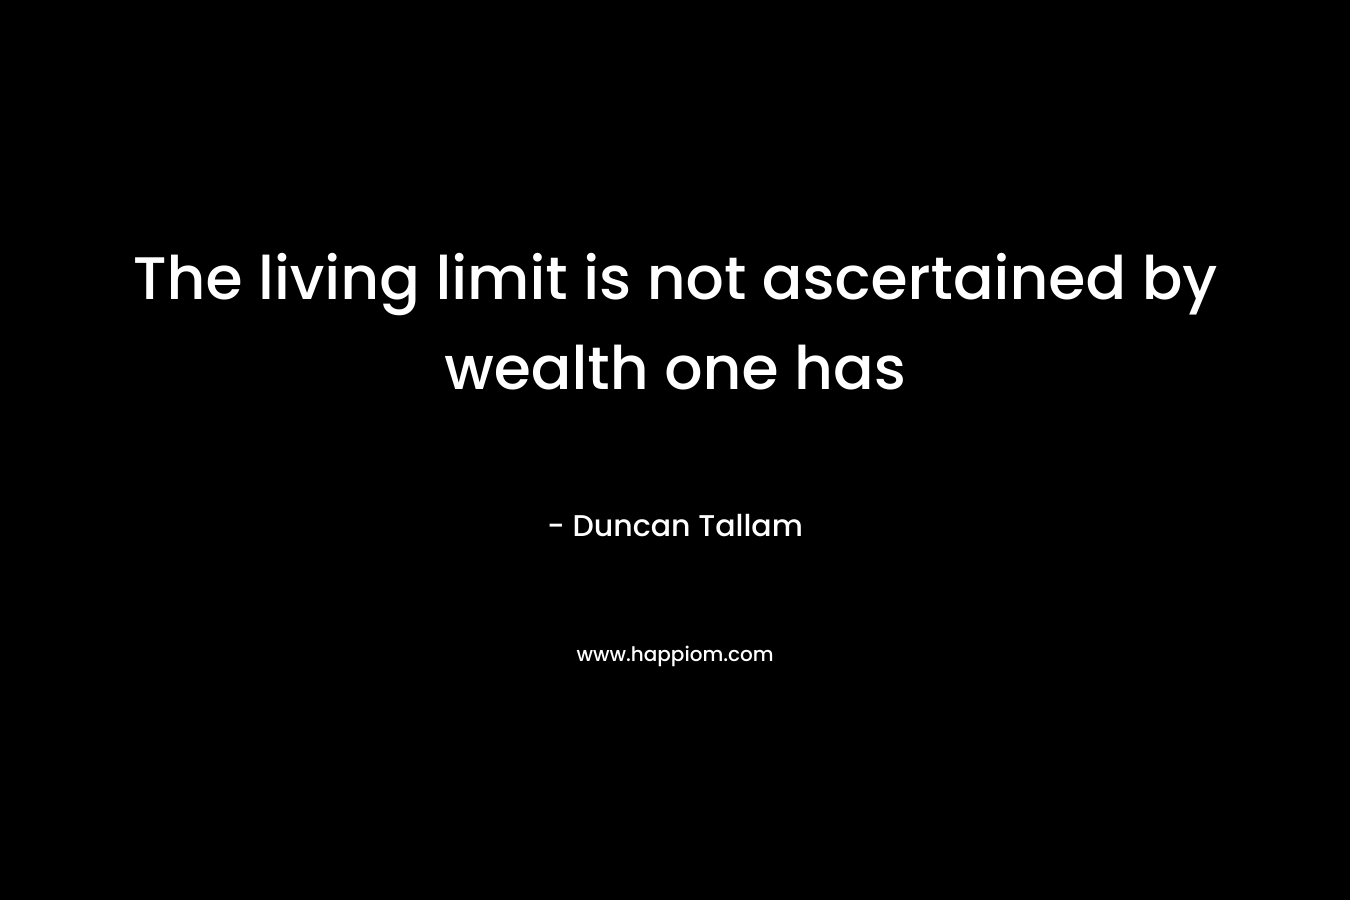 The living limit is not ascertained by wealth one has